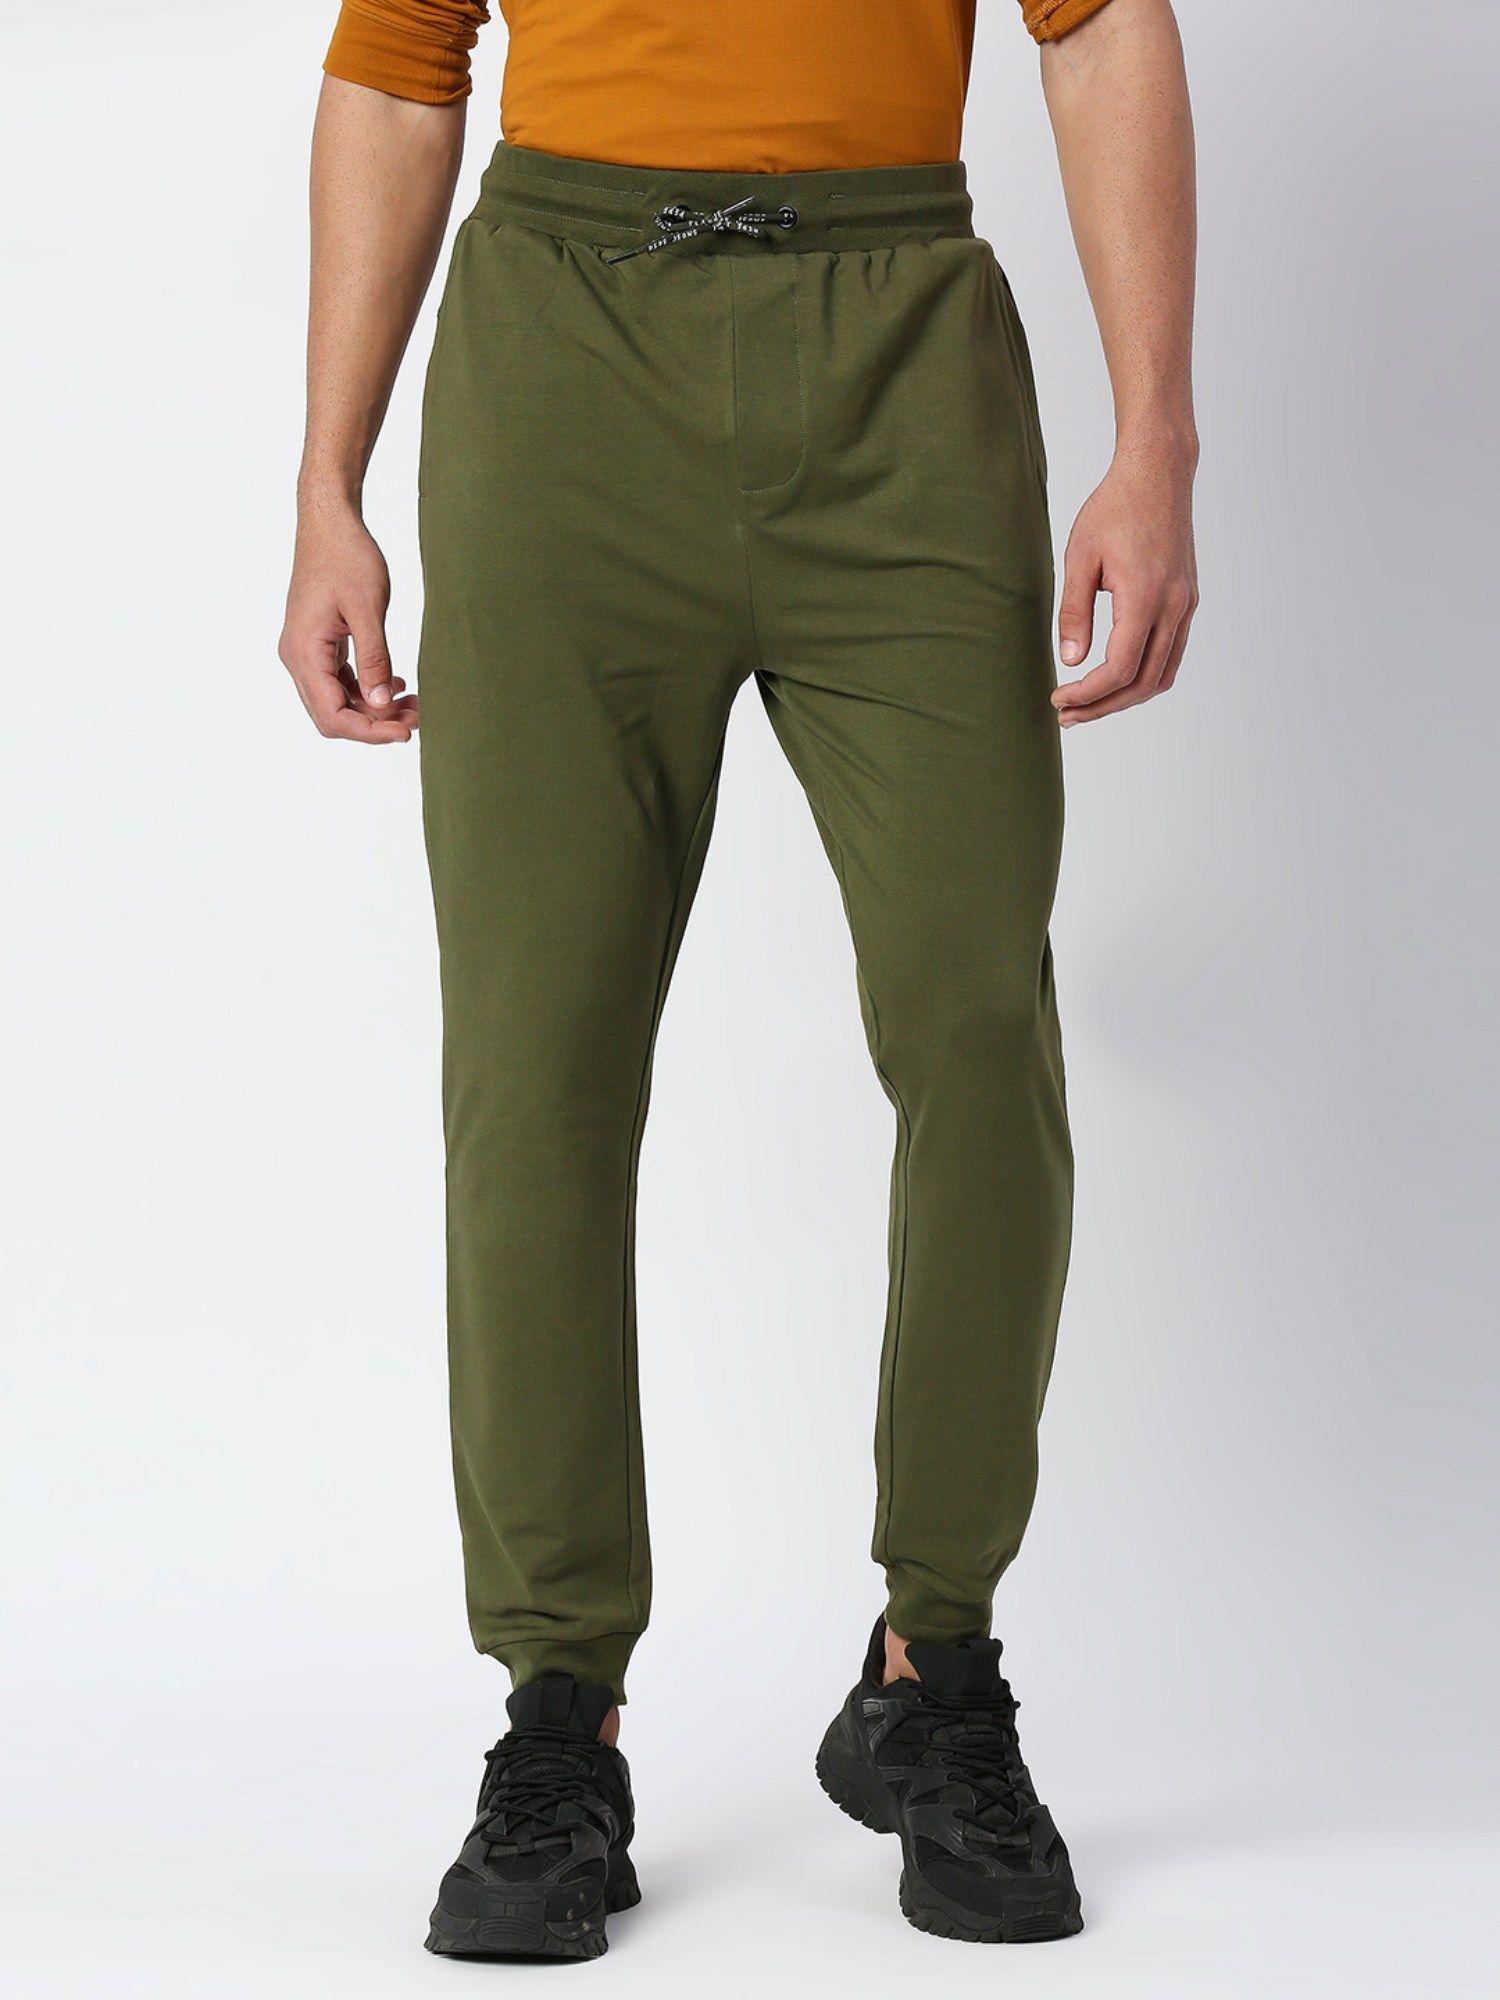 fuzz-placement-solid-green-joggers